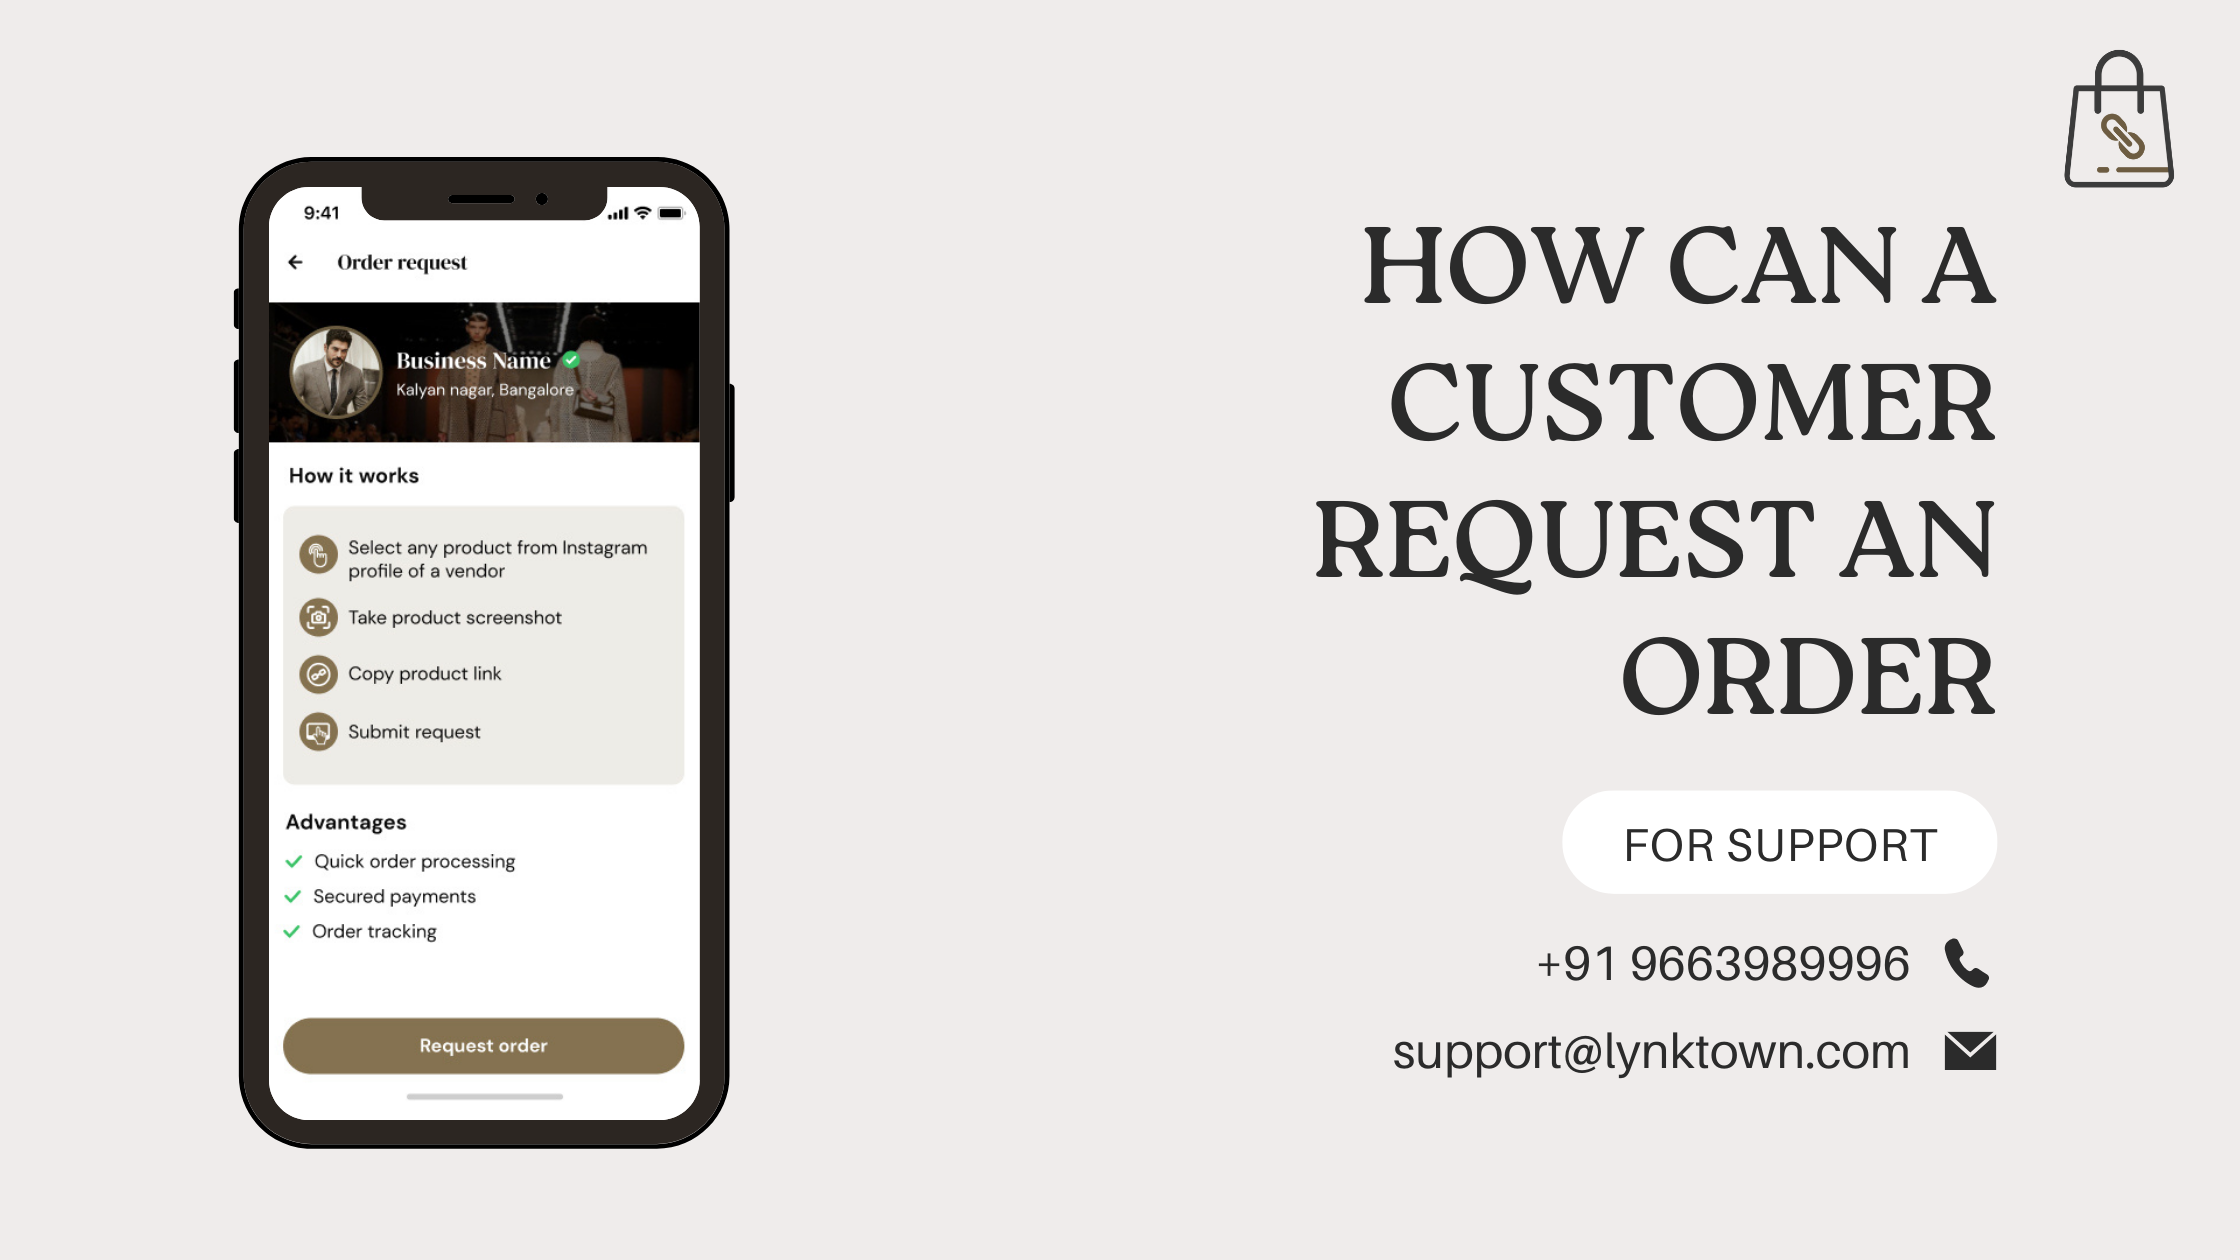 How can a customer request an order from a seller?